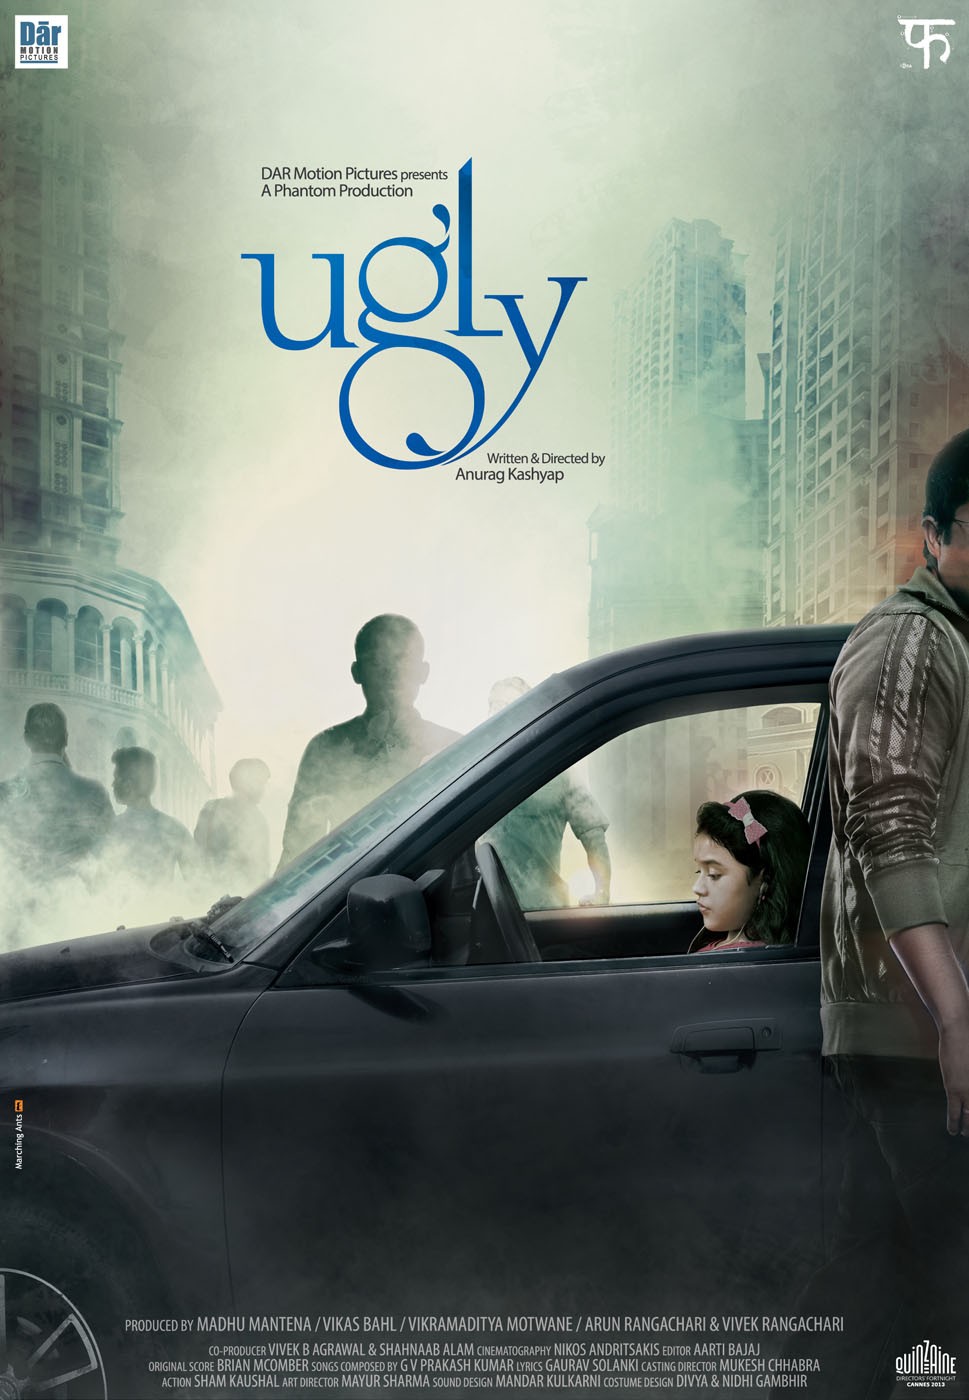 Extra Large Movie Poster Image for Ugly (#1 of 6)